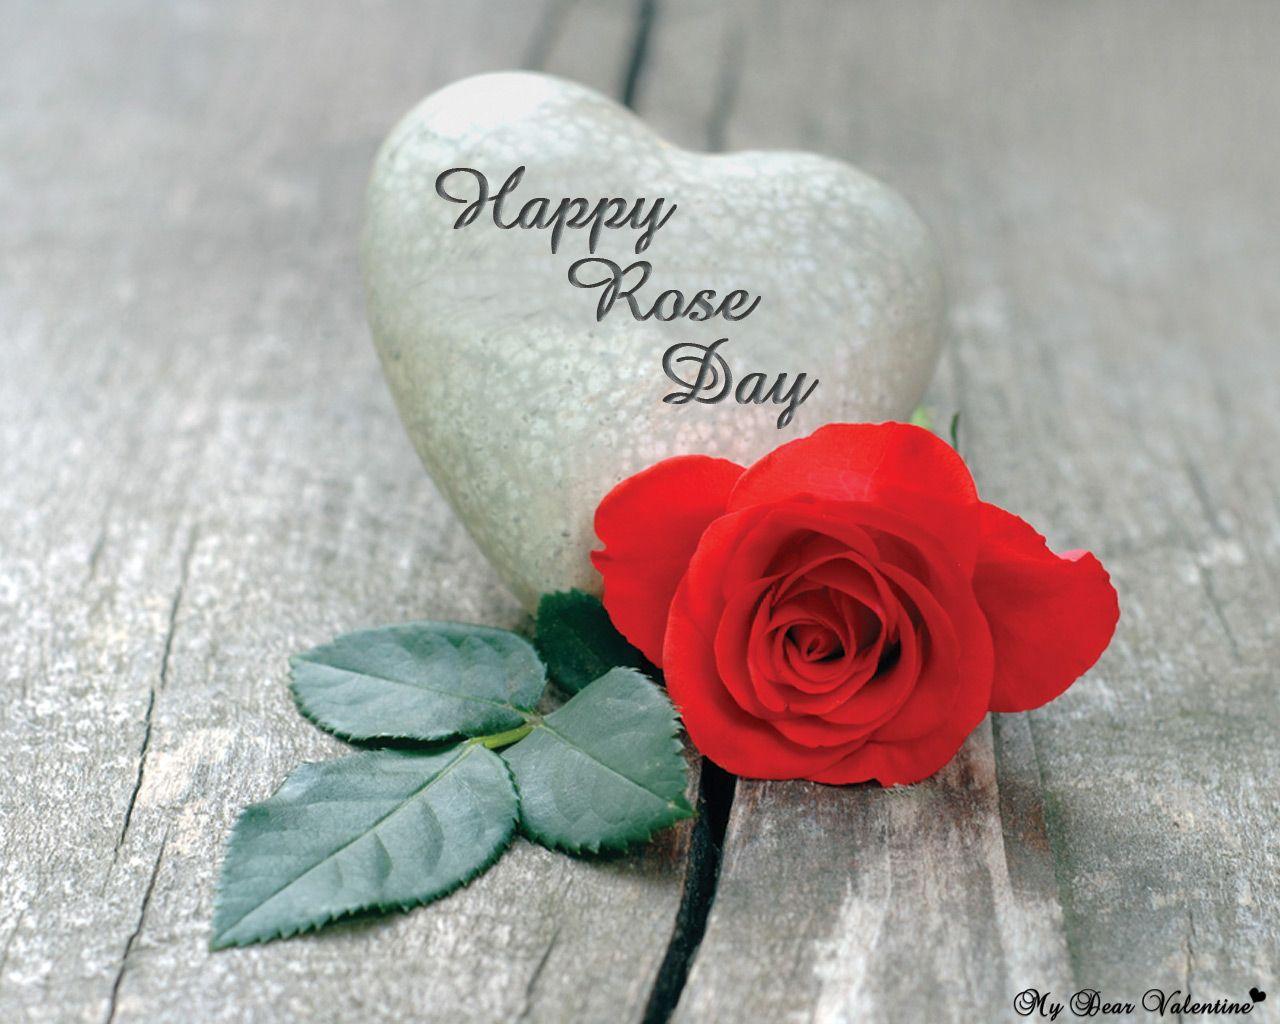 Best Happy Rose Day Wallpapers 2021